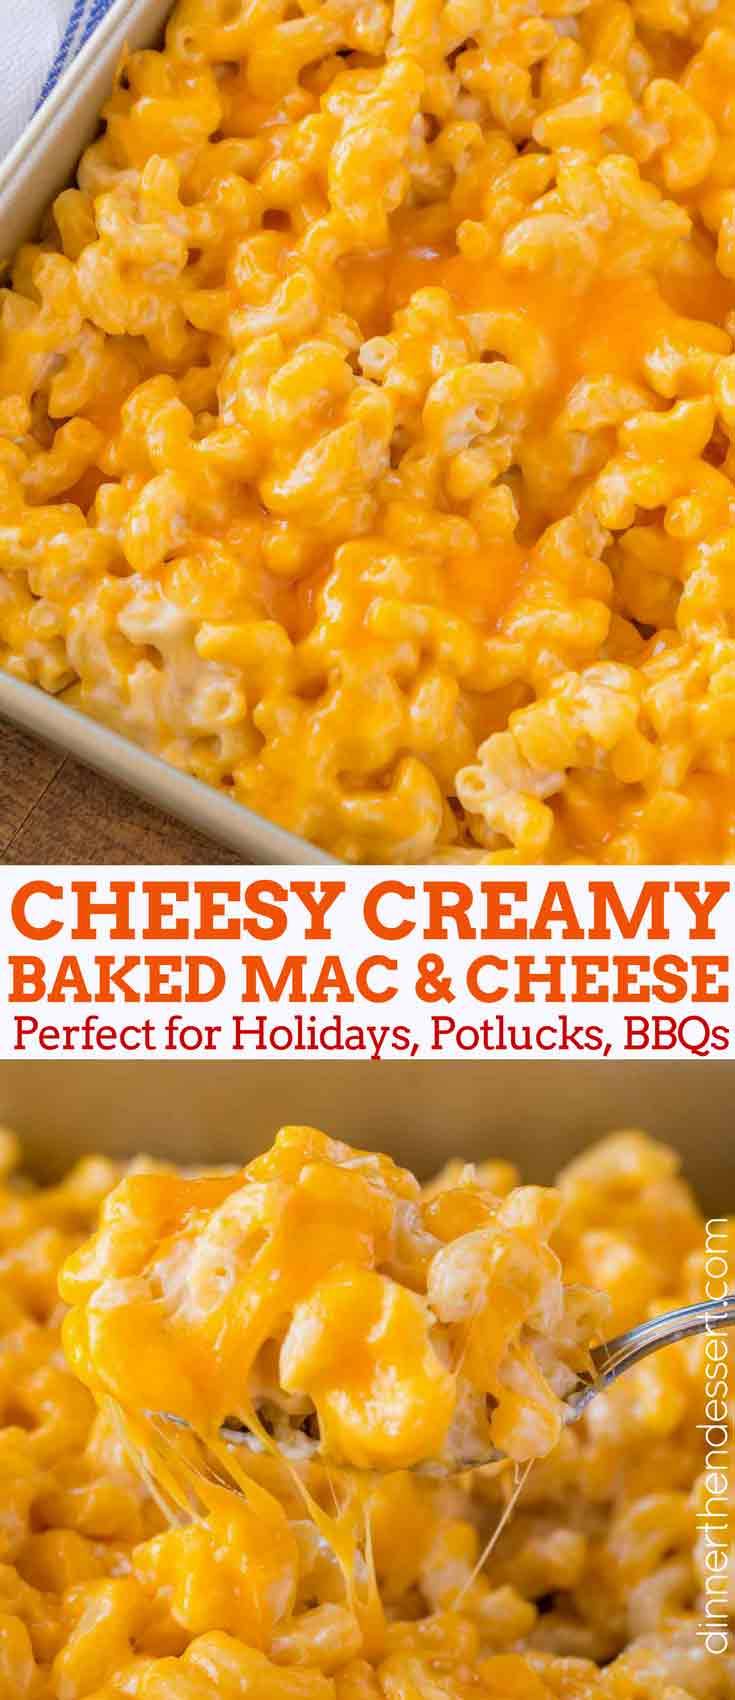 Dessert Macaroni And Cheese
 Baked Mac and Cheese Dinner then Dessert